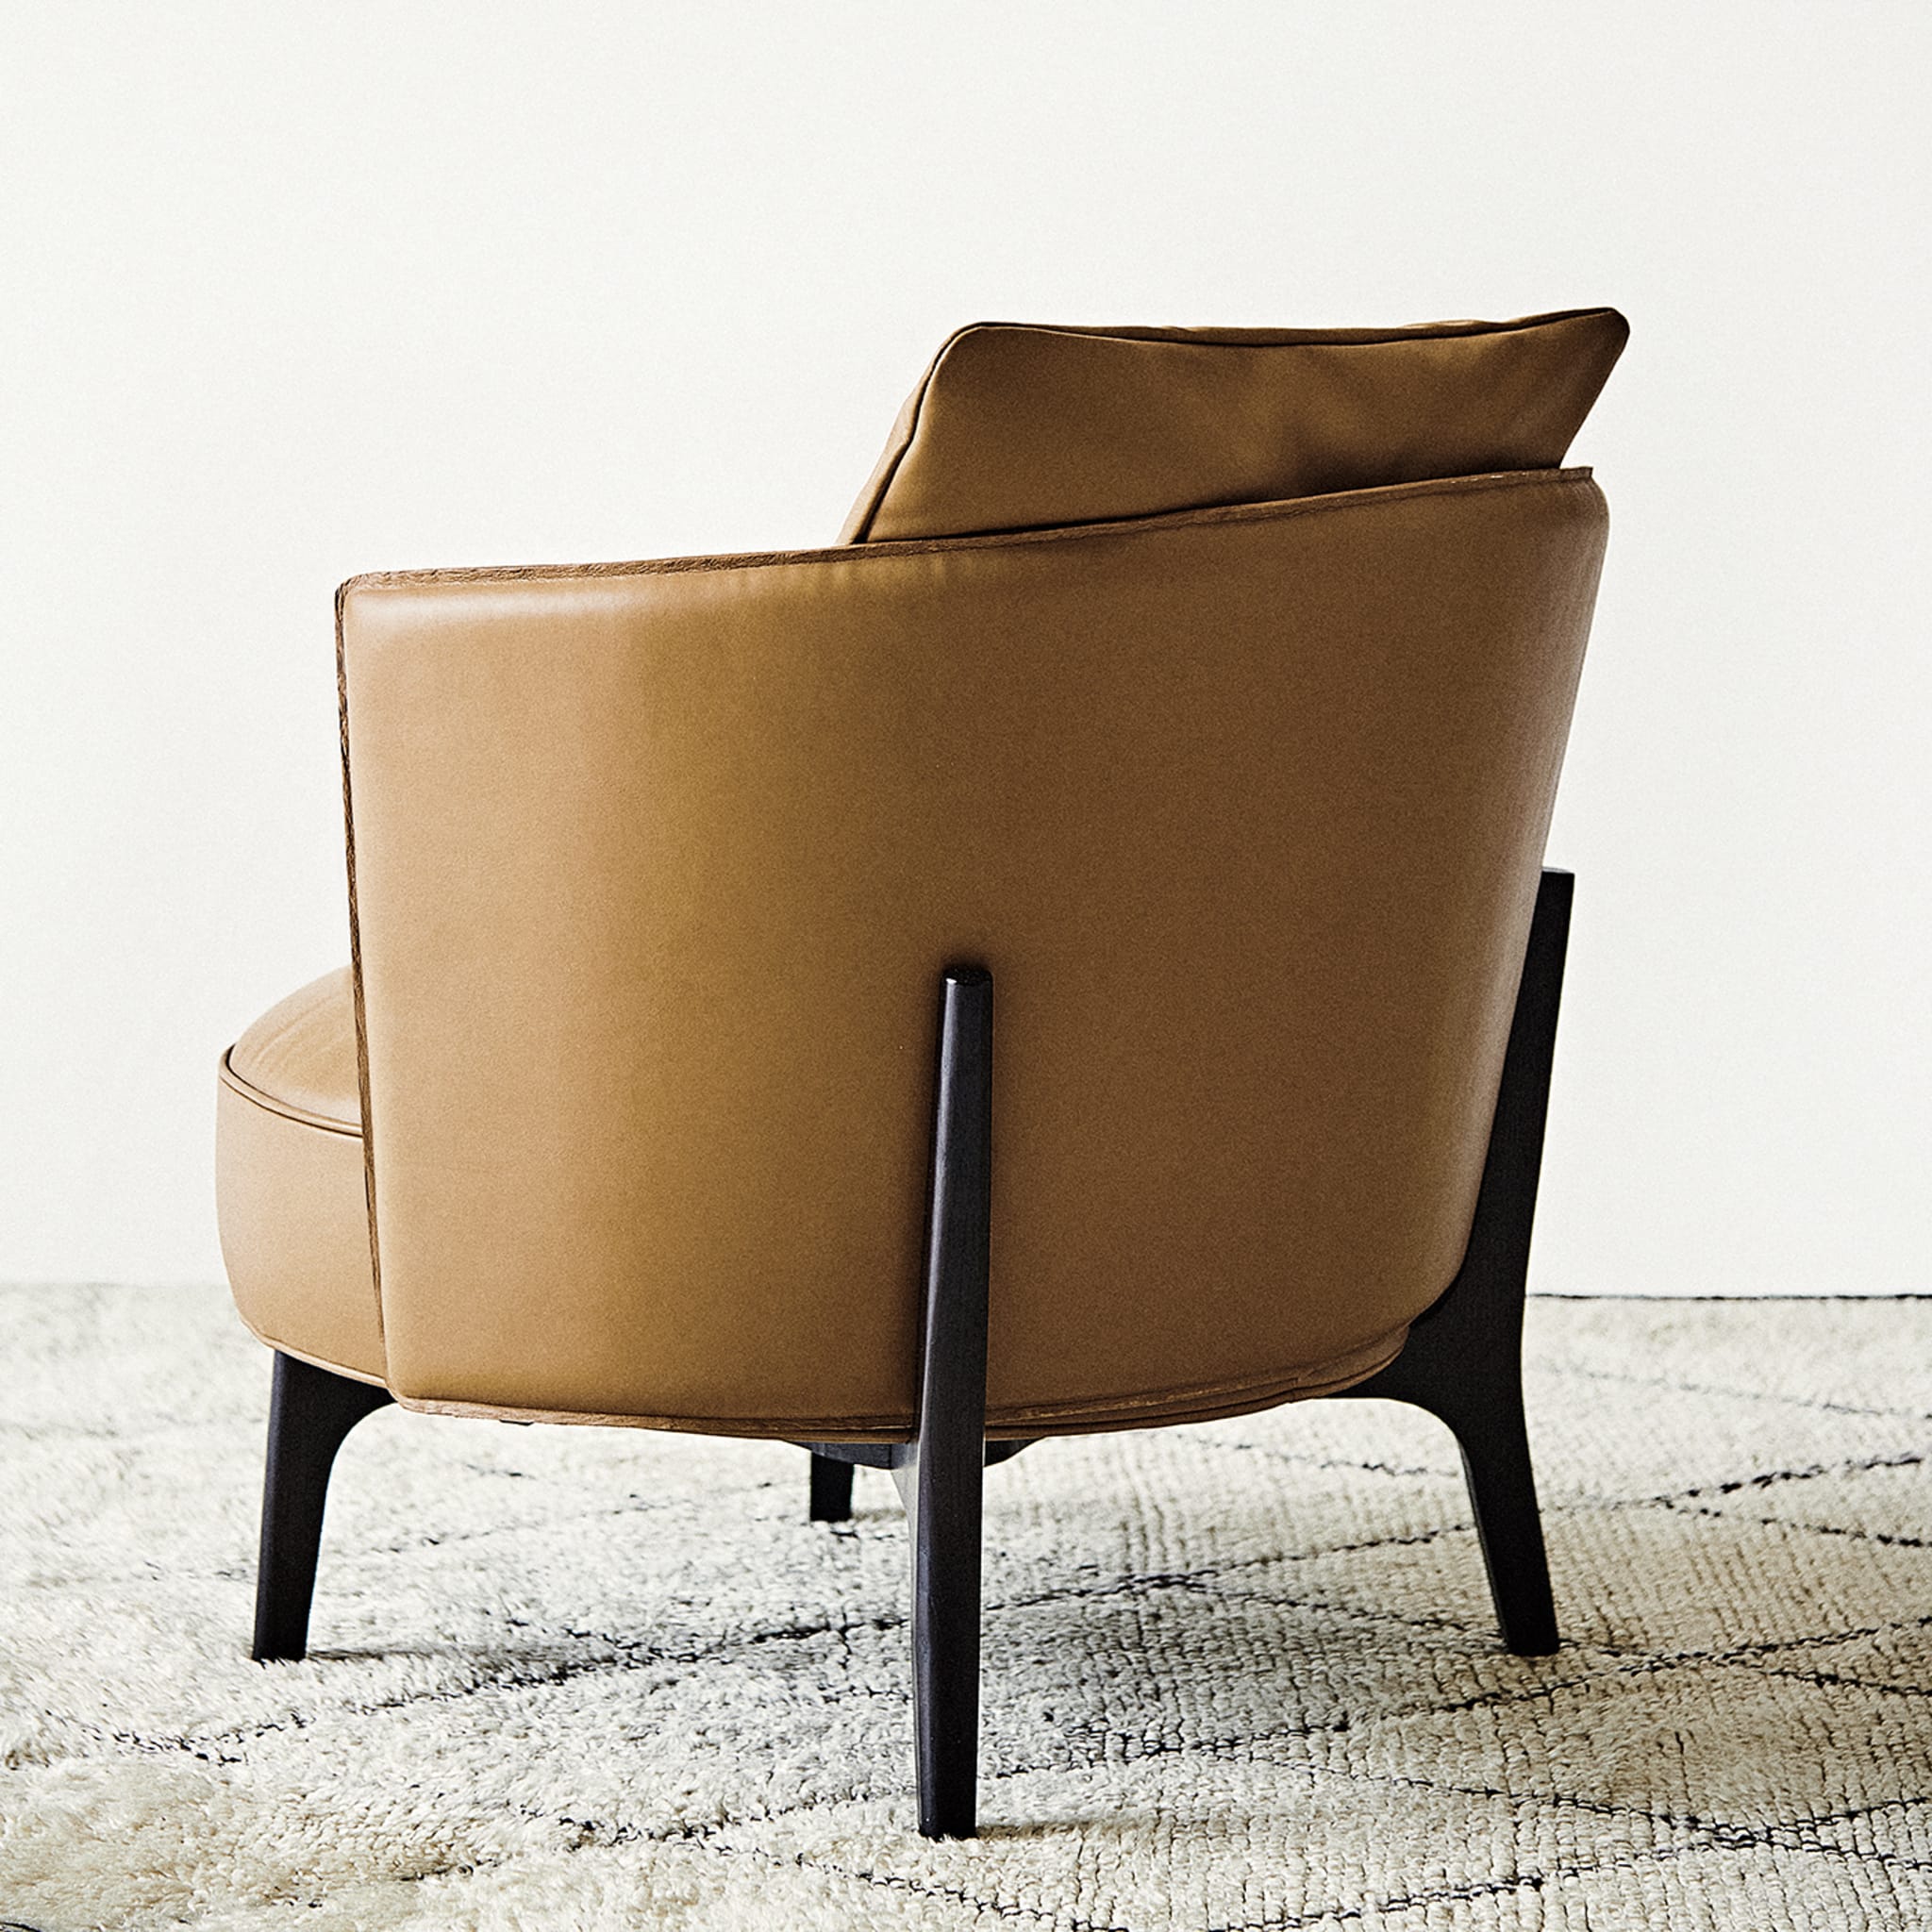 Ares 104 Brown & Black Armchair by Ludovica + Roberto Palomba - Alternative view 1